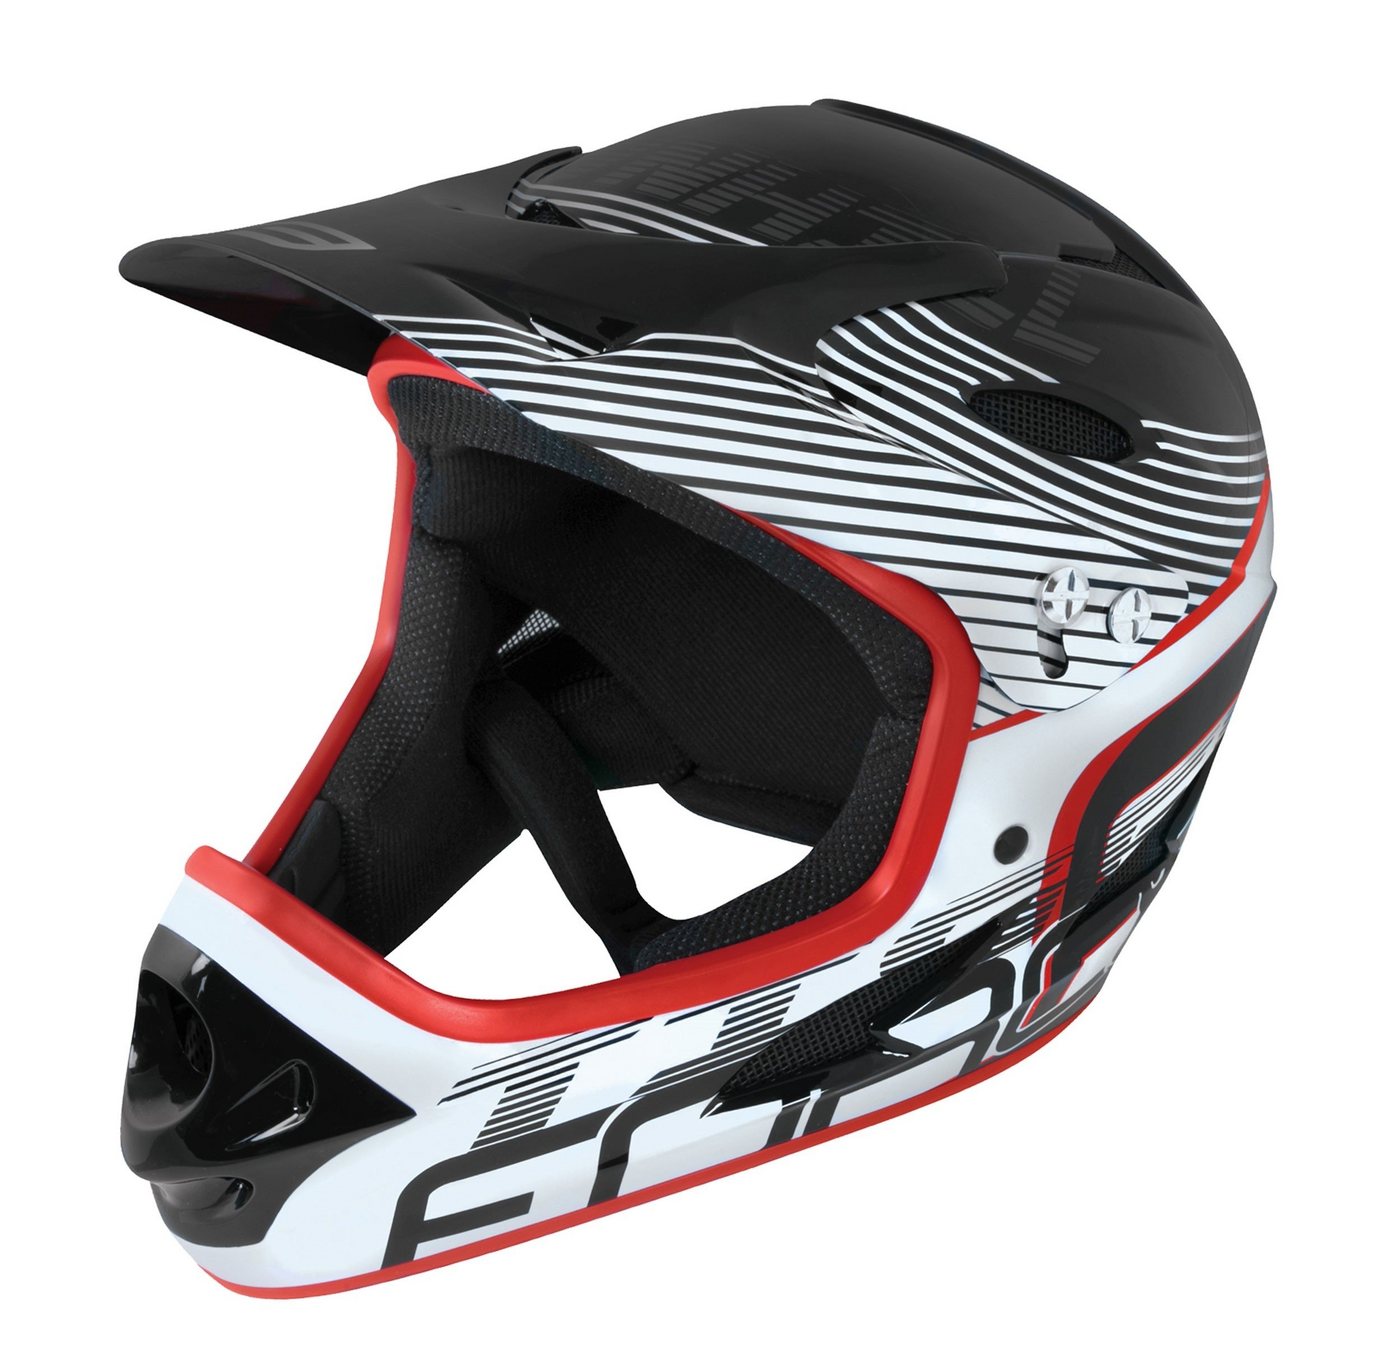 FORCE Fahrradhelm Downhill Helm FORCE TIGER black-red-white L-XL von FORCE